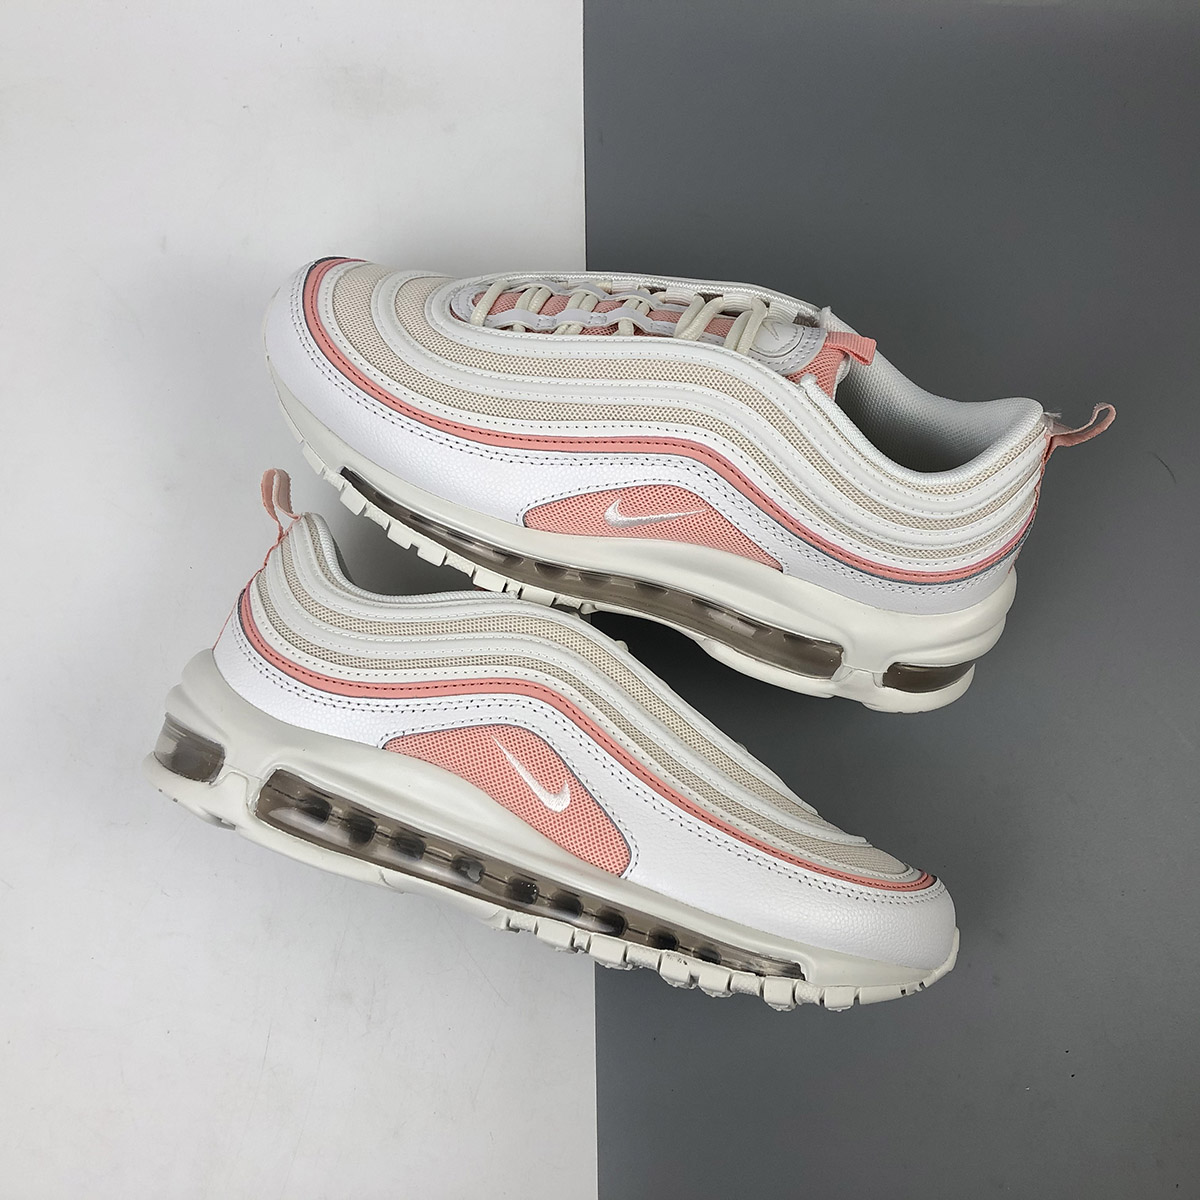 Nike Air Max 97 WMNS Summit White/Bleached Coral For Sale – The Sole Line